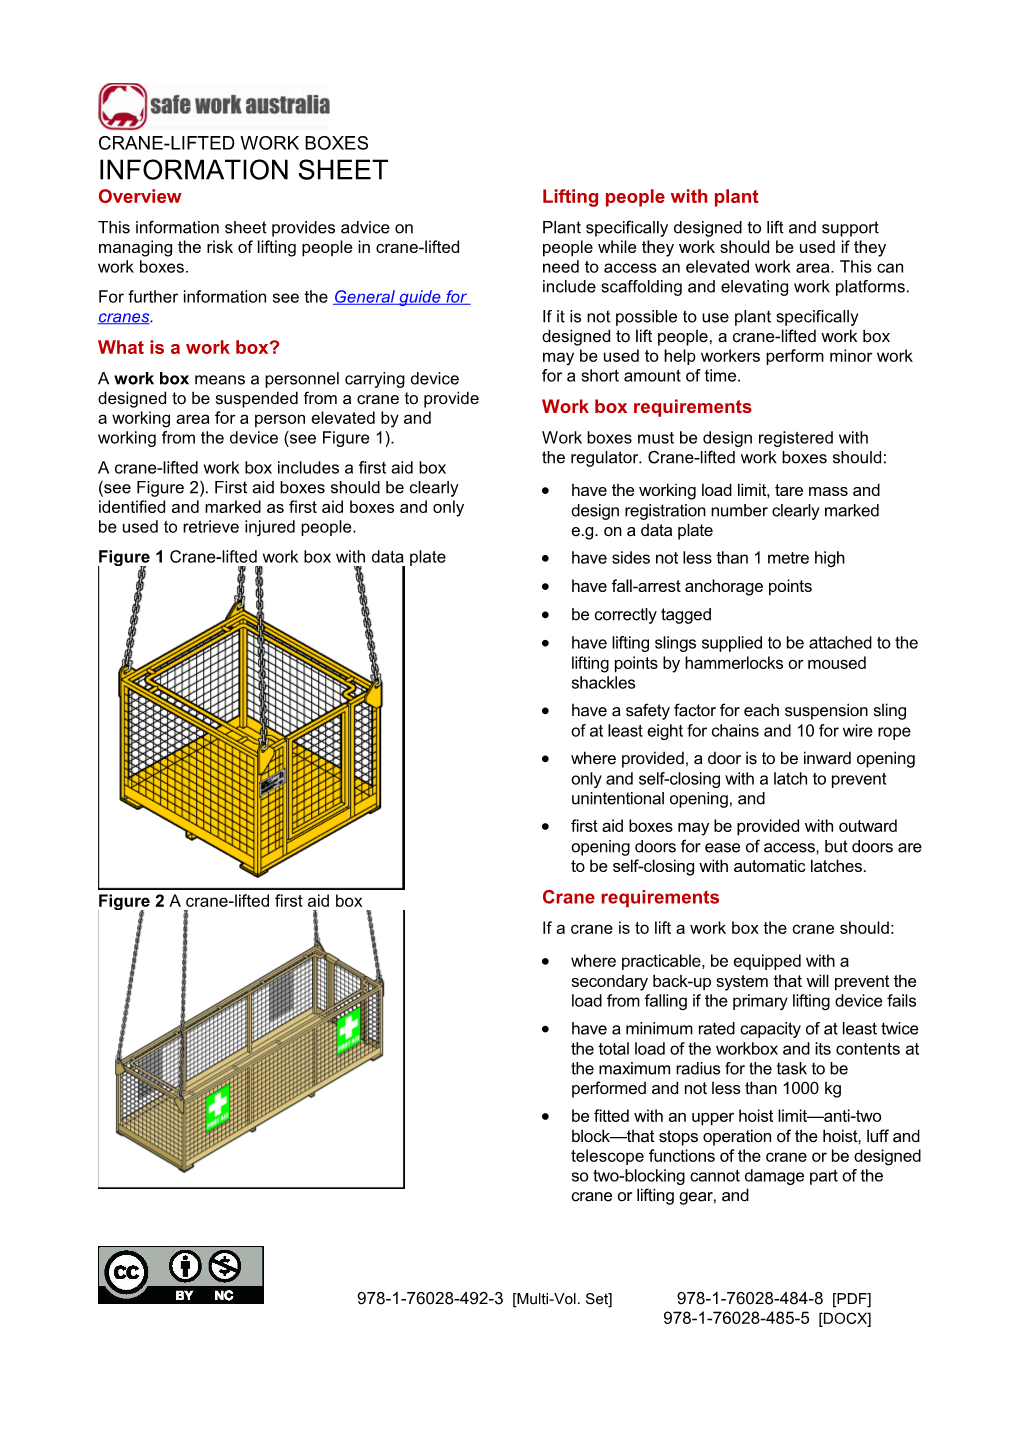 09. Crane-Lifted Work Boxes Information Sheet